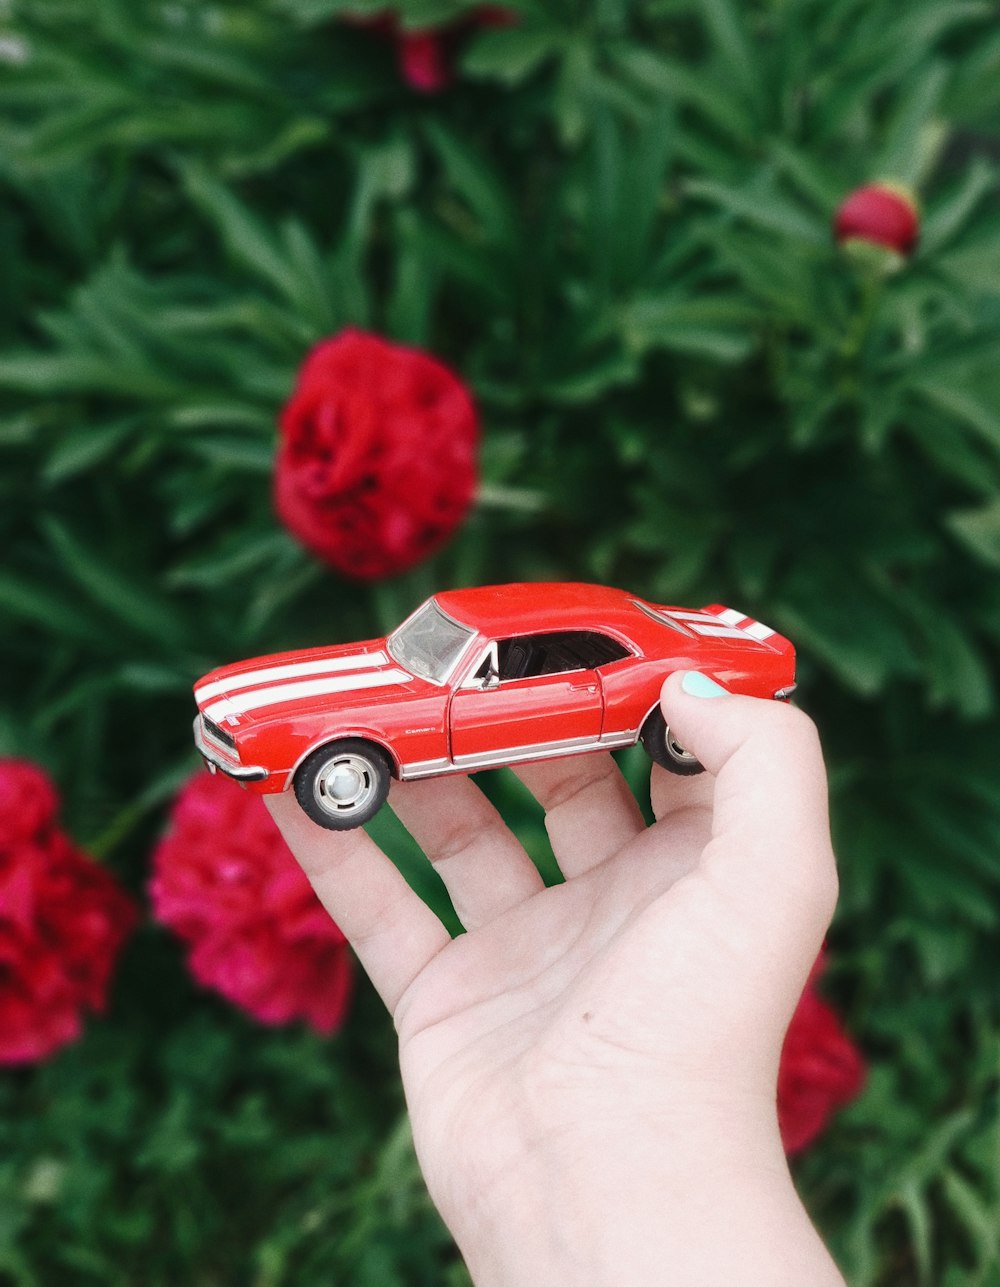 a hand holding a red toy car in front of flowers